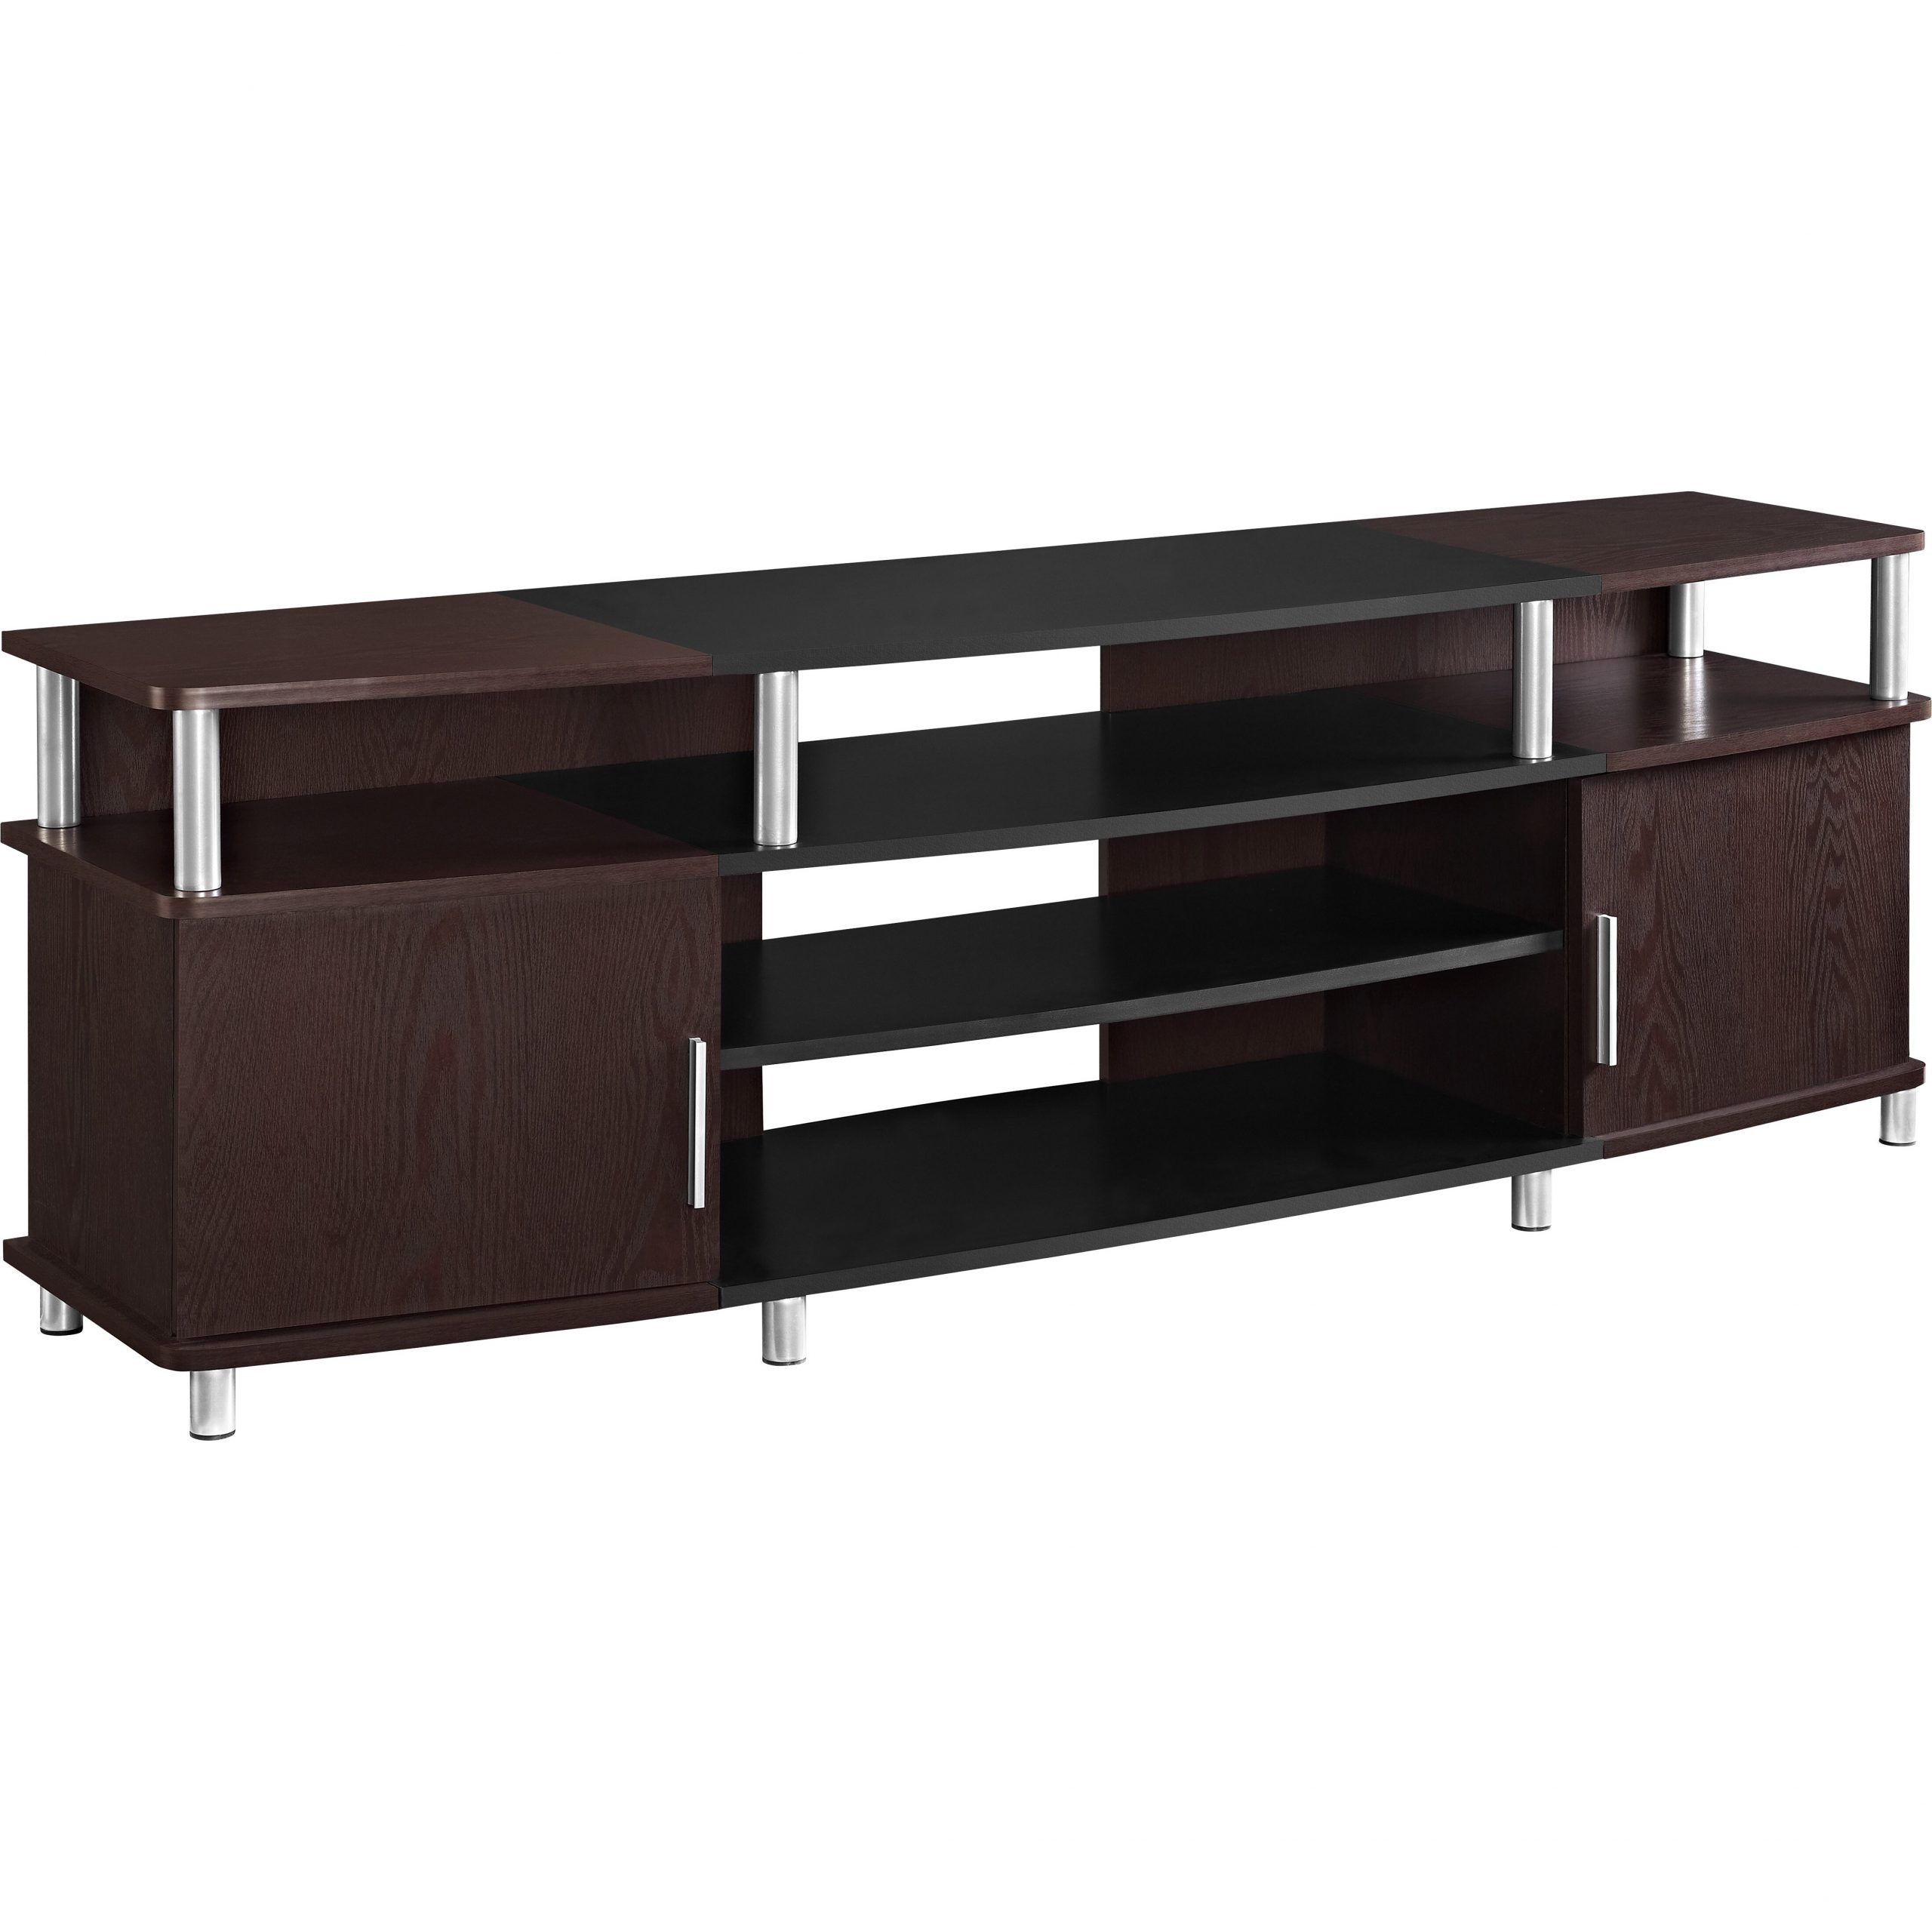 Altra Carson Tv Stand & Reviews | Wayfair Throughout Carson Tv Stands In Black And Cherry (View 9 of 15)